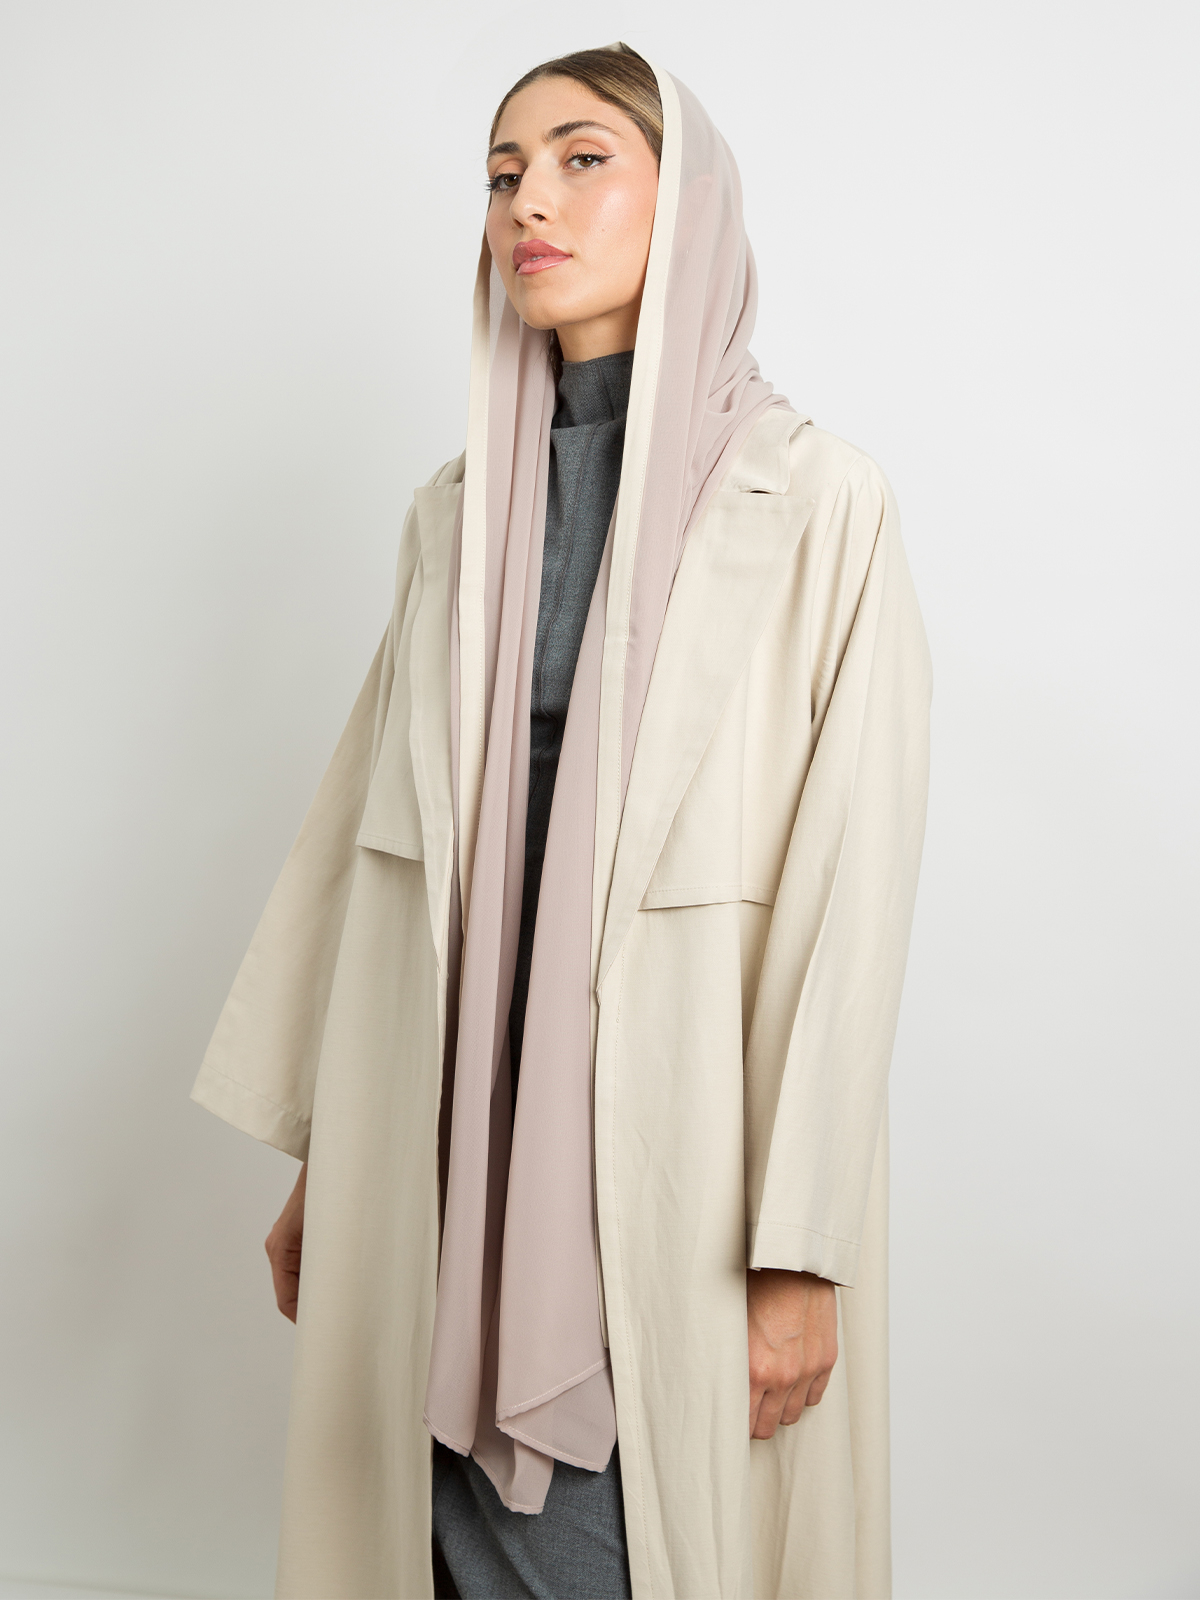 Beige - A Cut Long Open Trench Abaya in Natural Soft Fabric